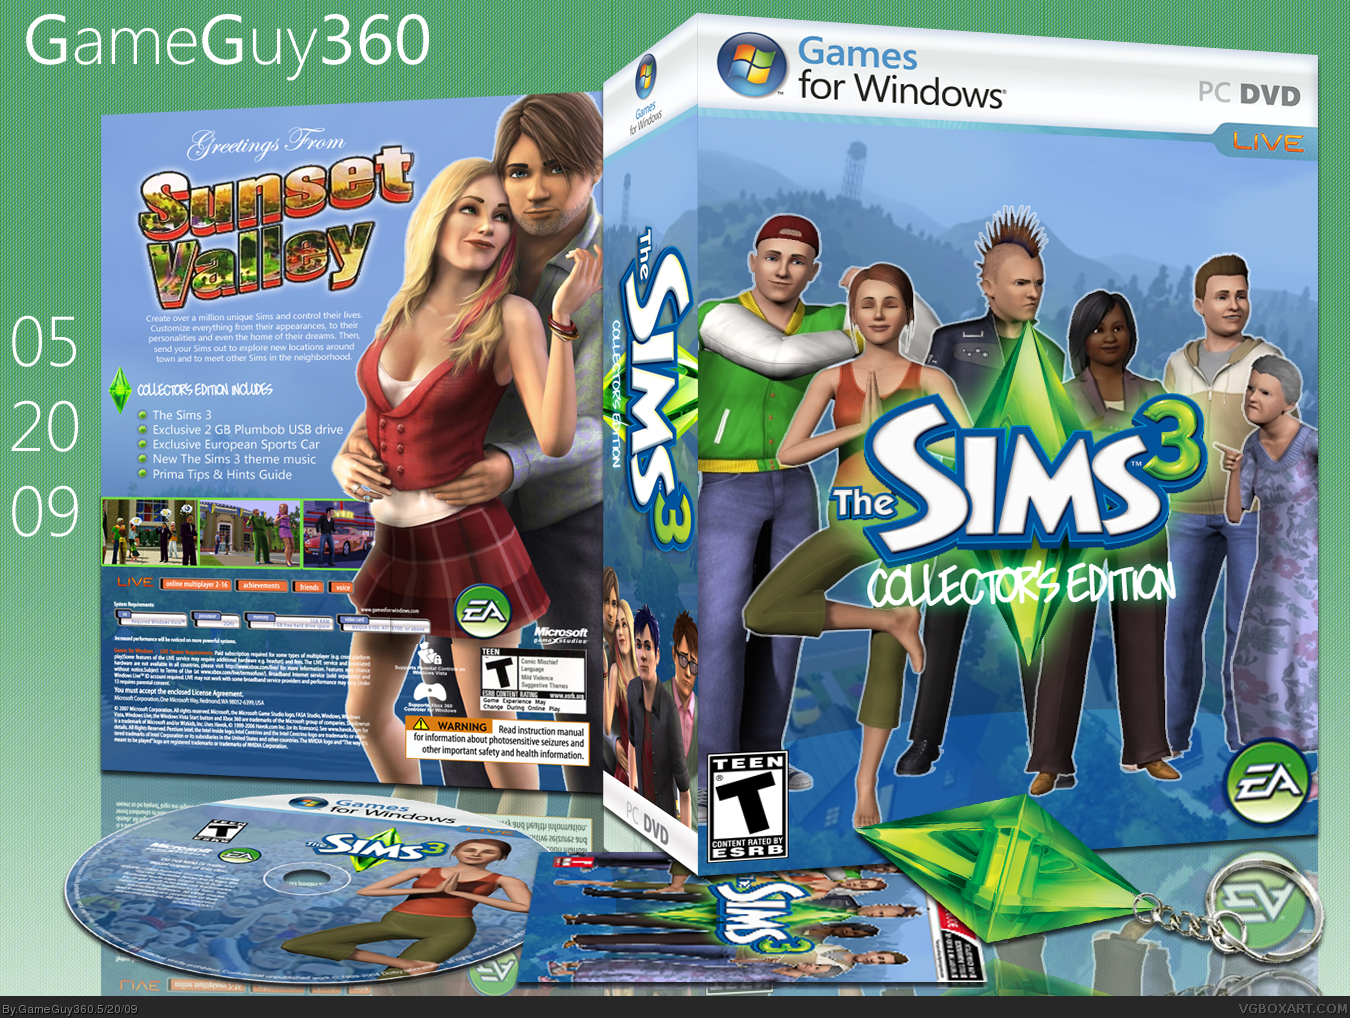 The Sims 3 Collector's Edition box cover